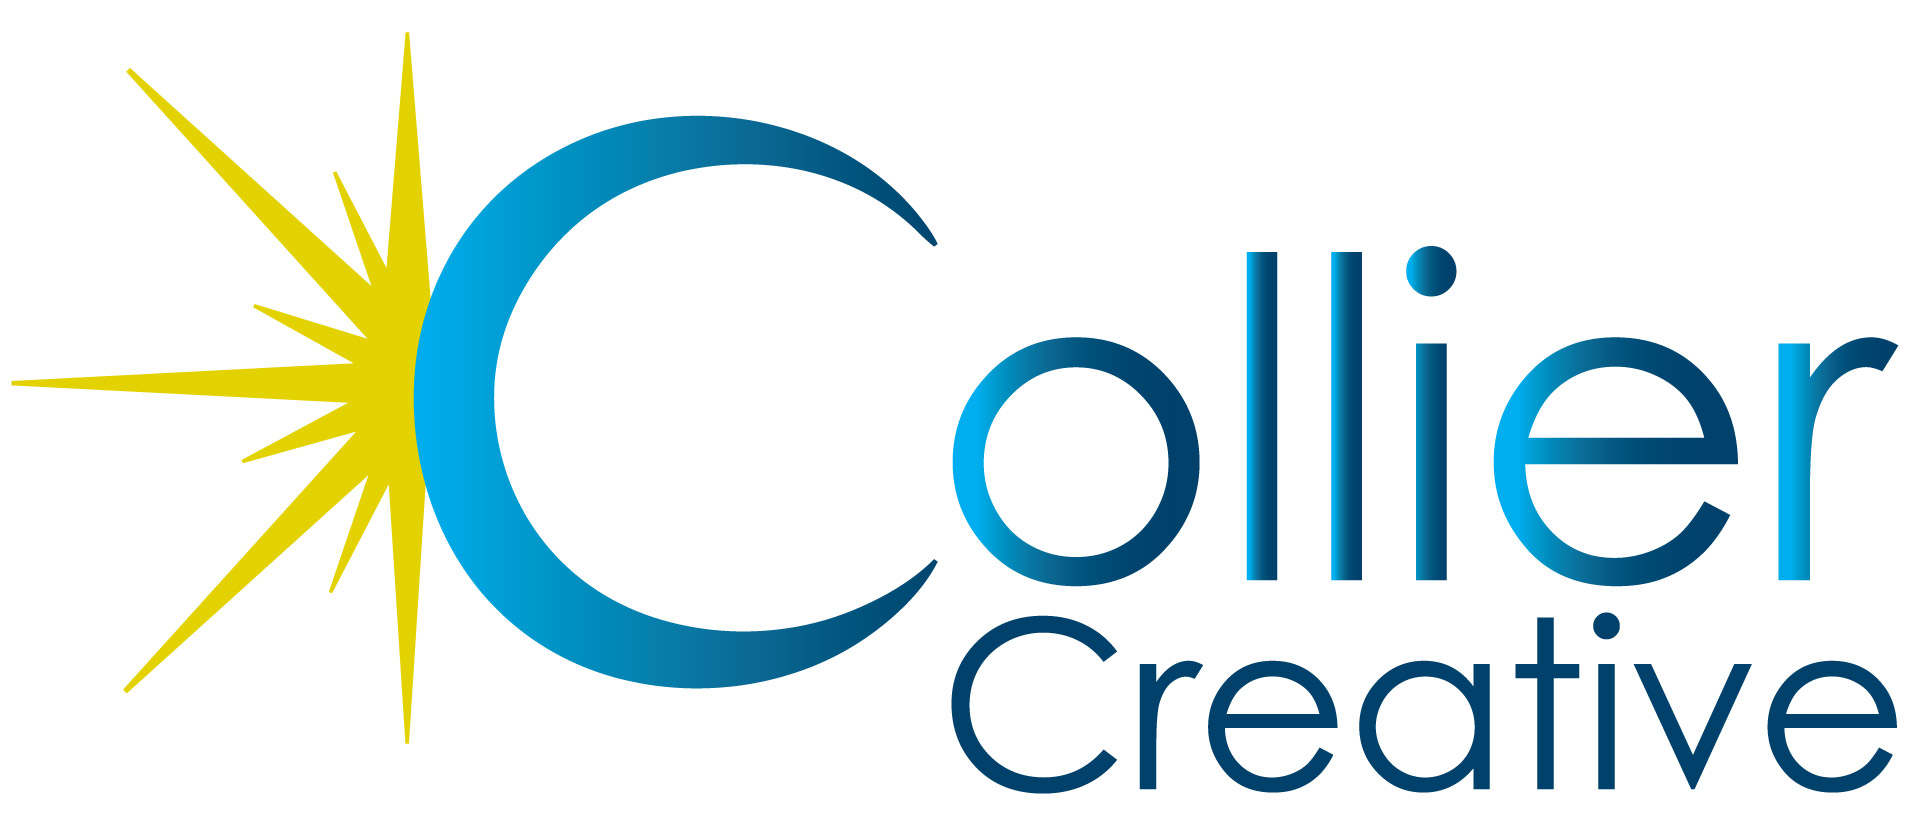 Collier Creative of SWFL